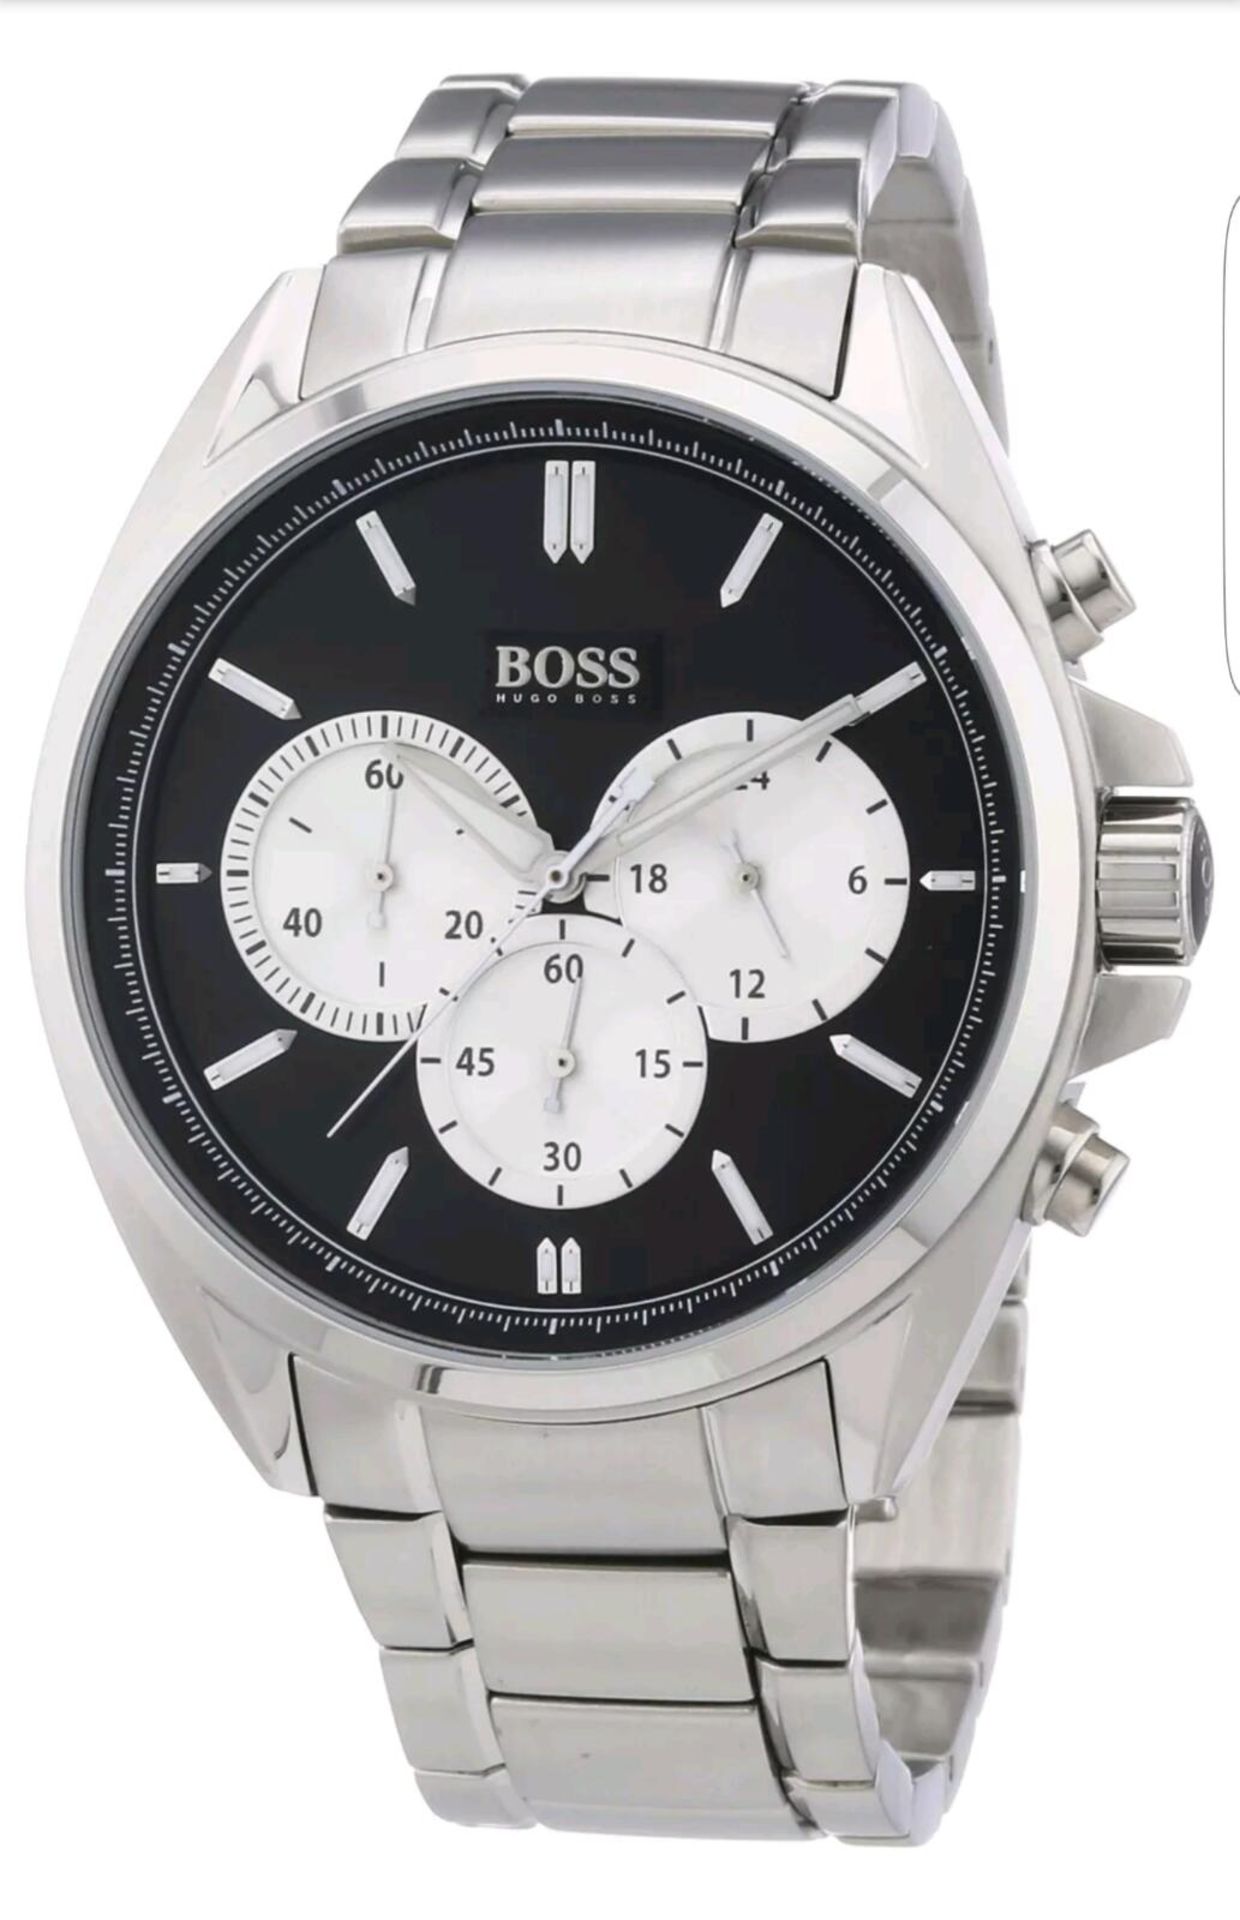 BRAND NEW HUGO BOSS 1512883, COMPLETE WITH ORIGINAL BOX AND MANUAL